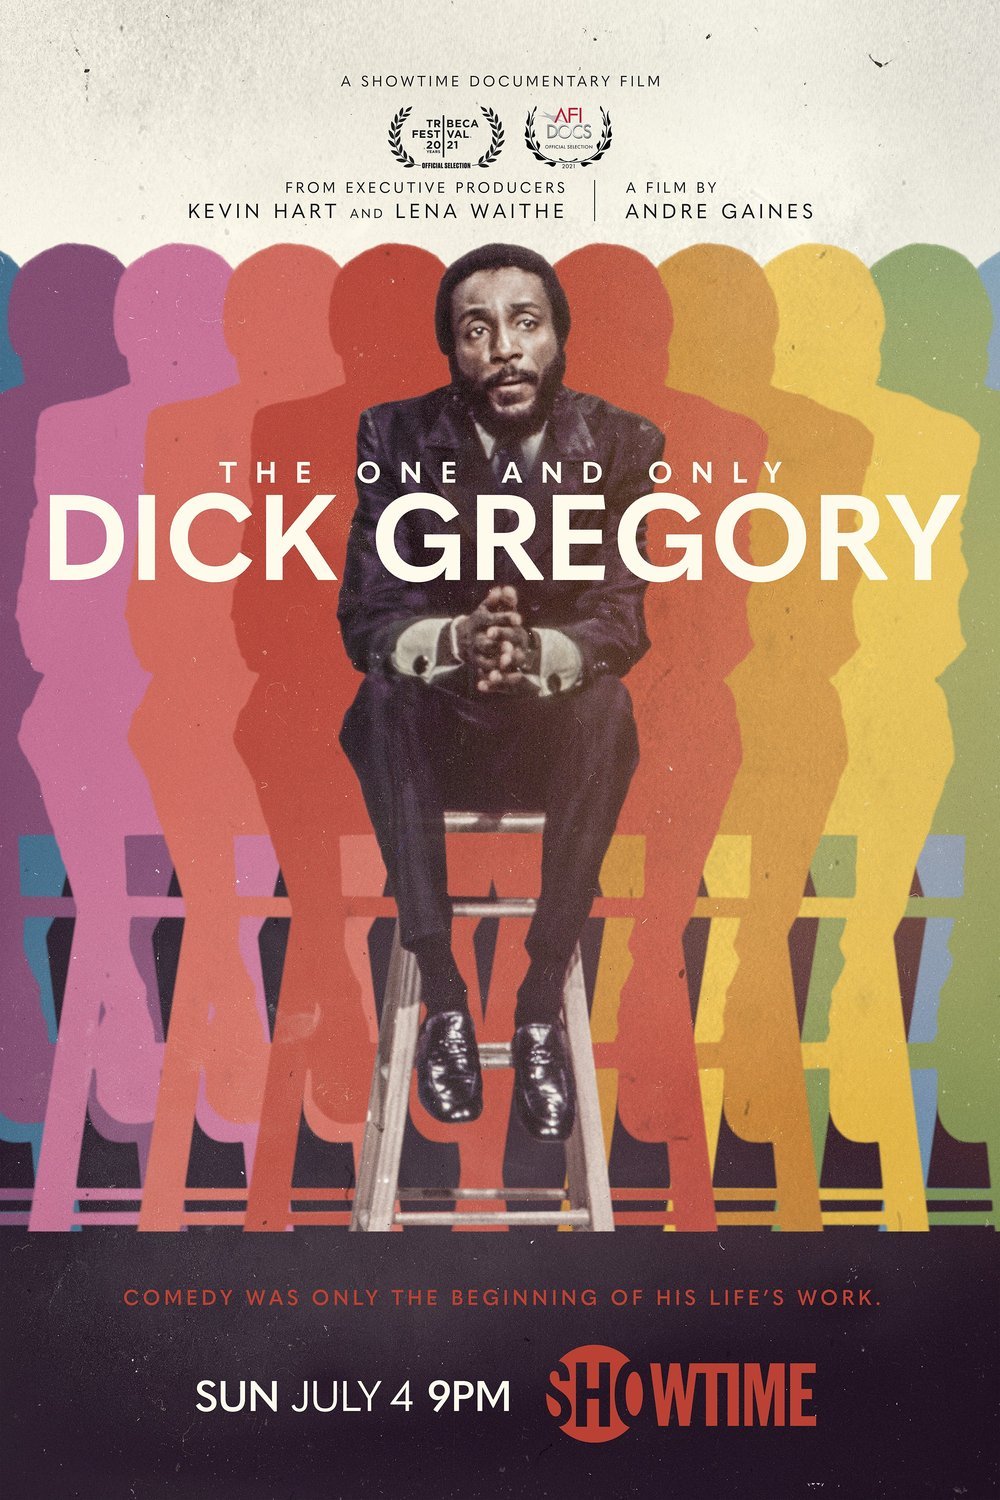 L'affiche du film The One and Only Dick Gregory